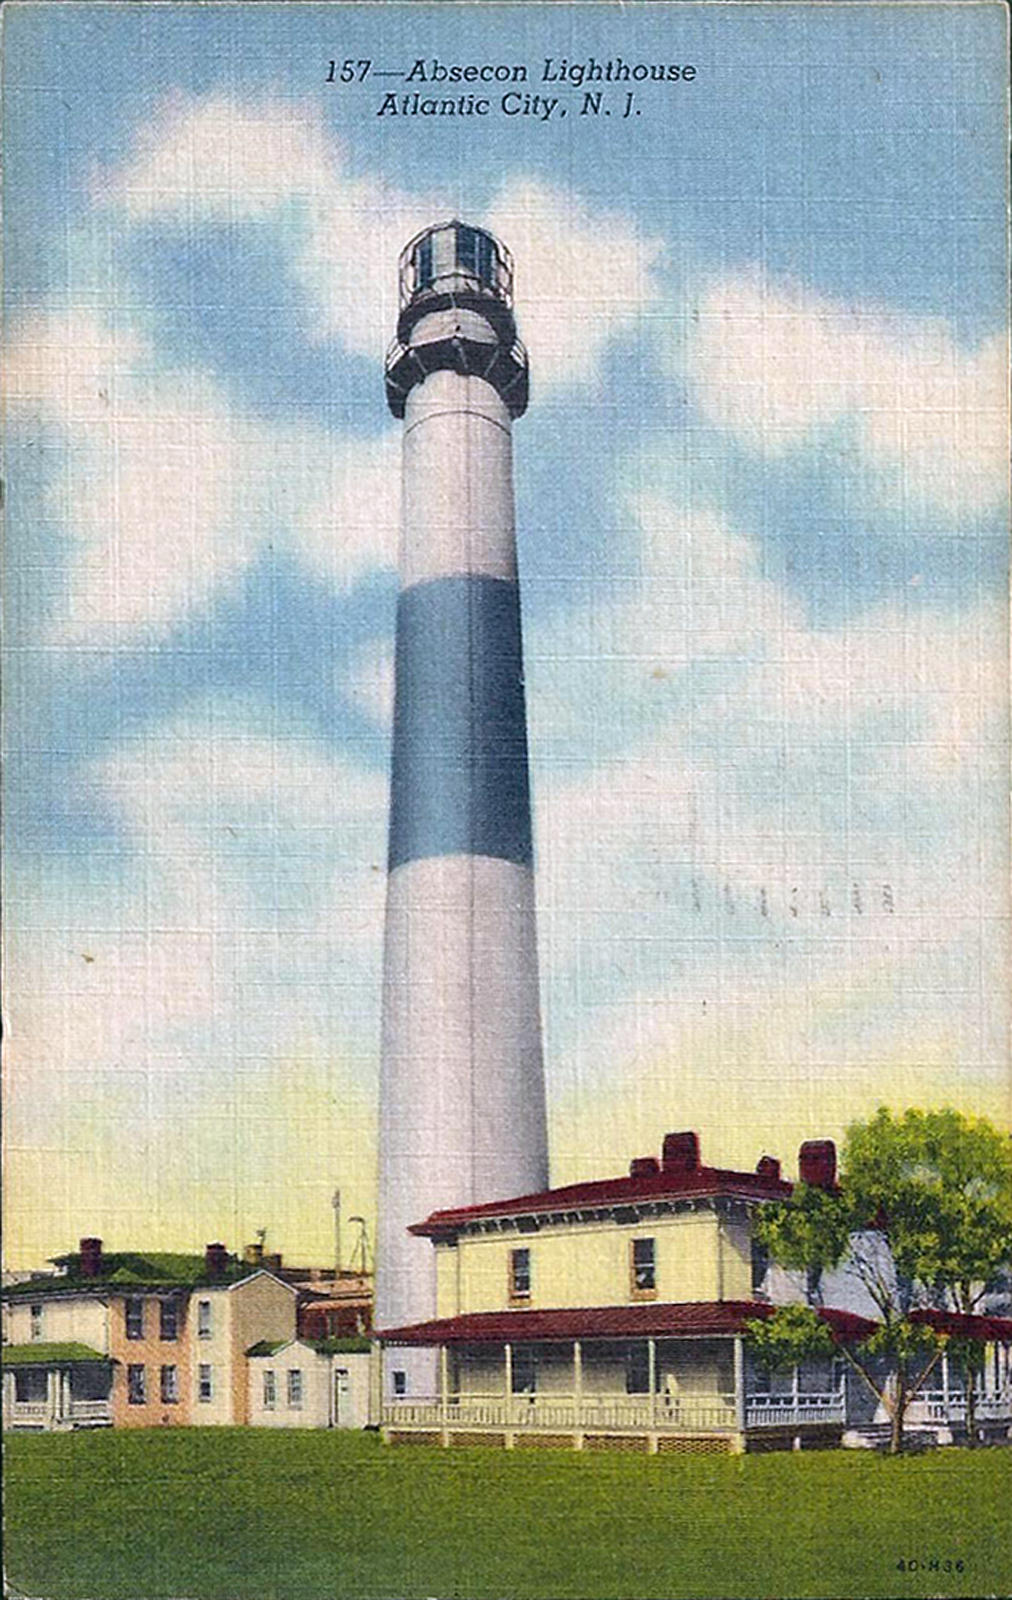 Atlantic City - A view of Absecon Lighthouse